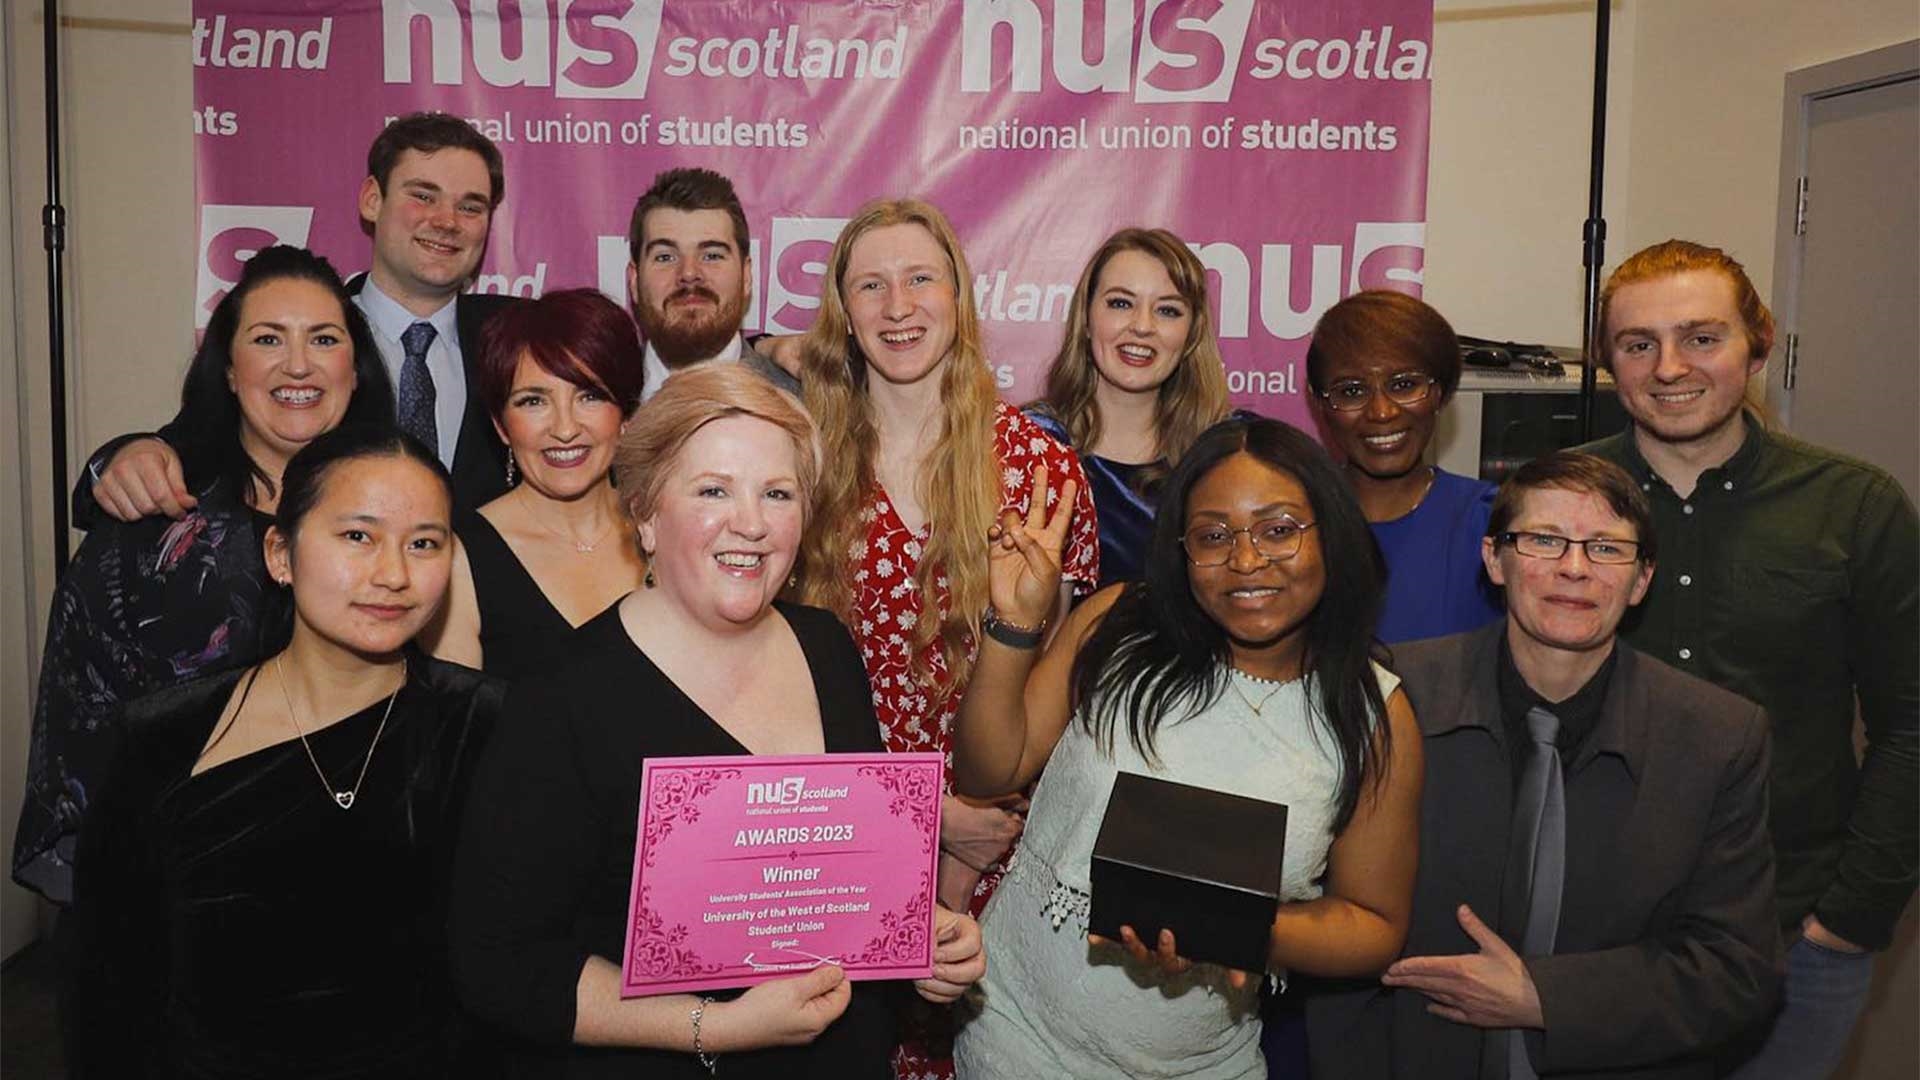 Union Staff posing at the NUS Scotland awards ceremony with a certificate